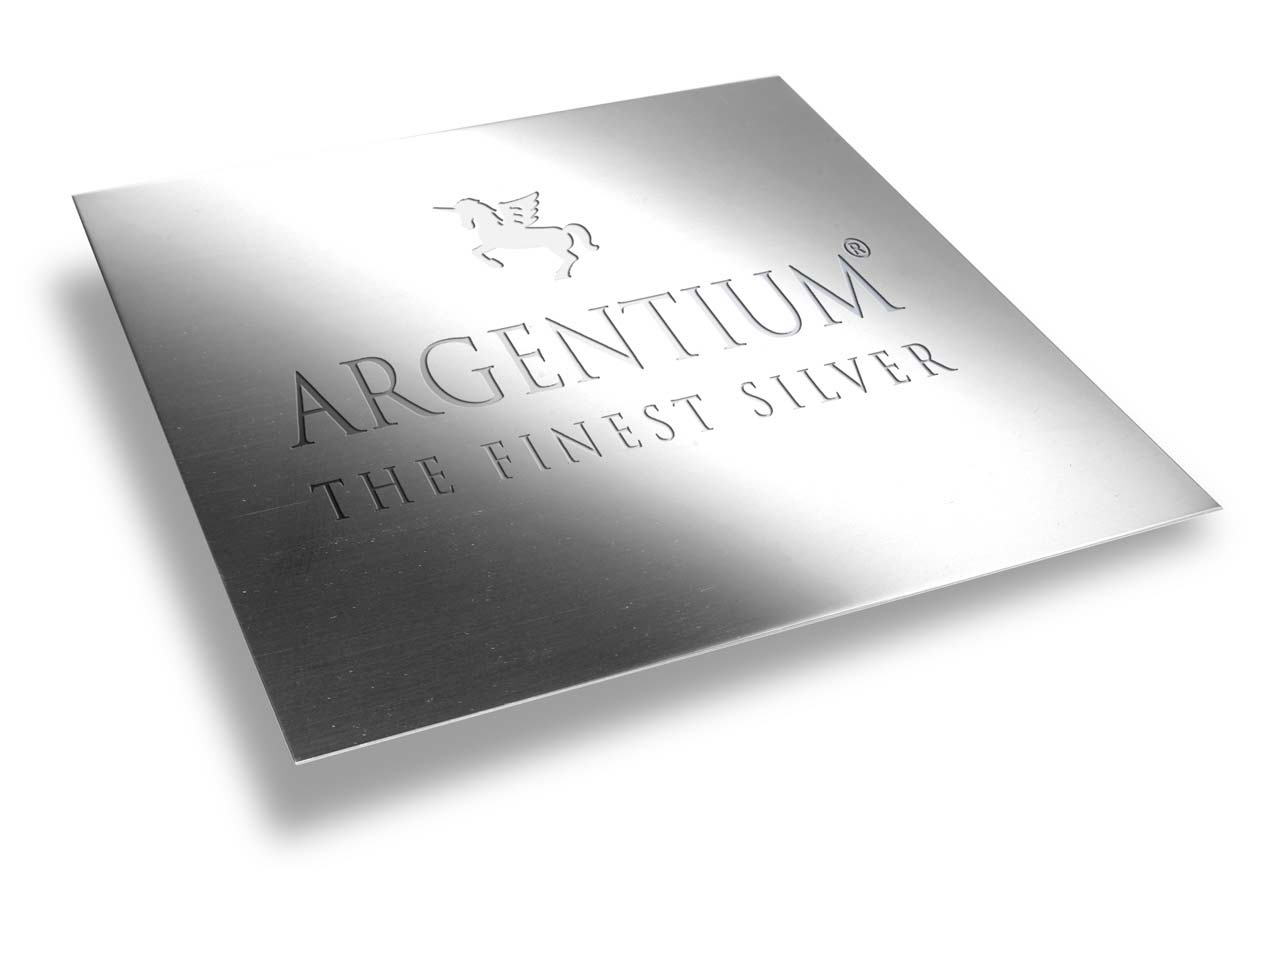 Argentium 940 Silver Sheet 0.70mm Questions & Answers